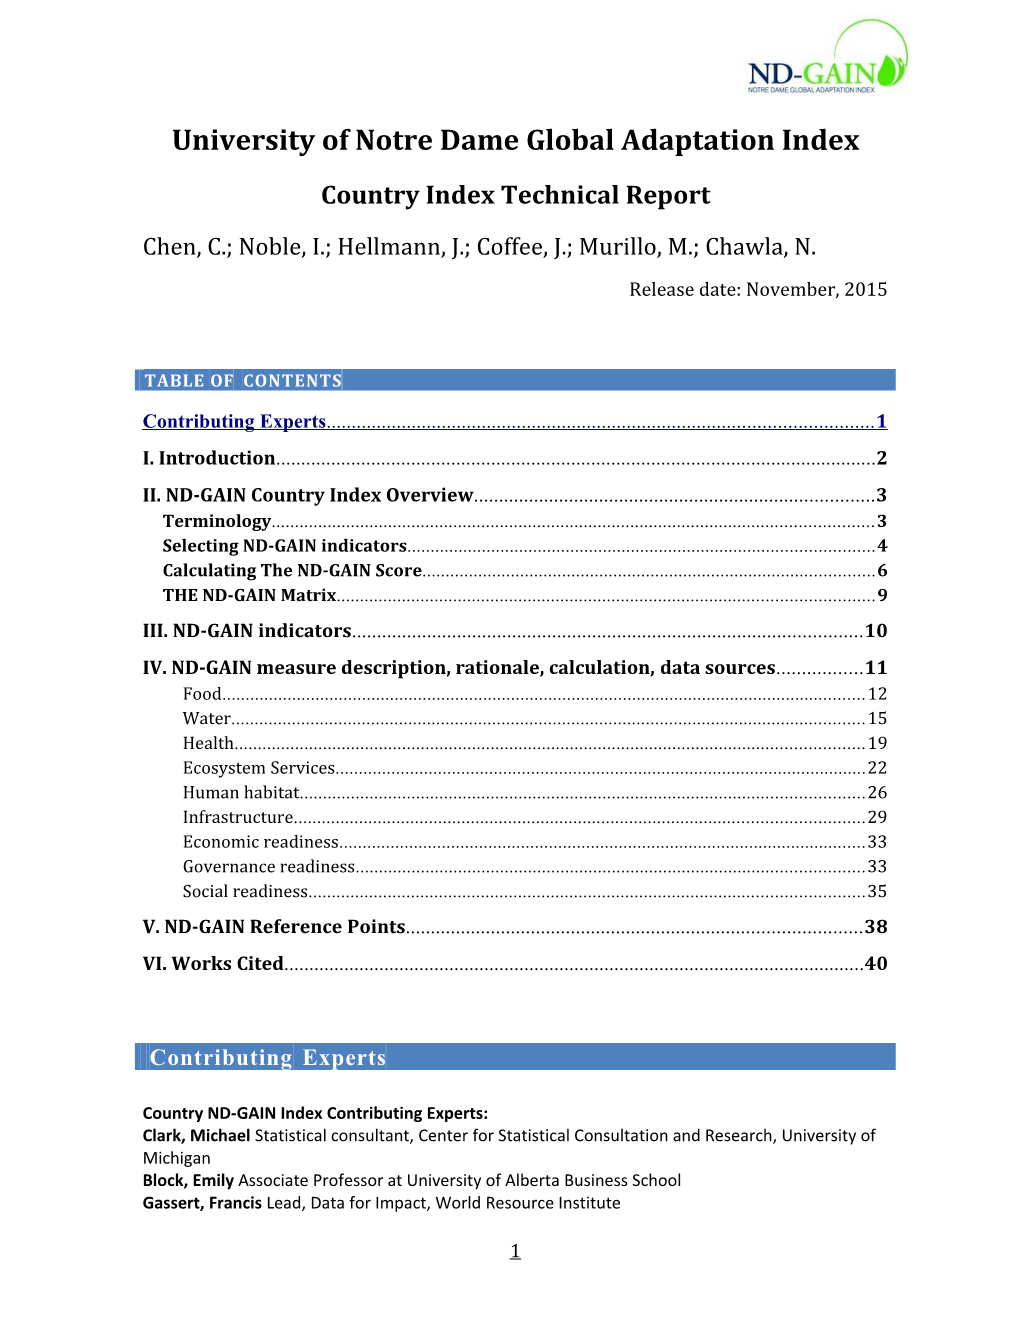 Technical Document - Country ND-GAIN Index - Nov 2015